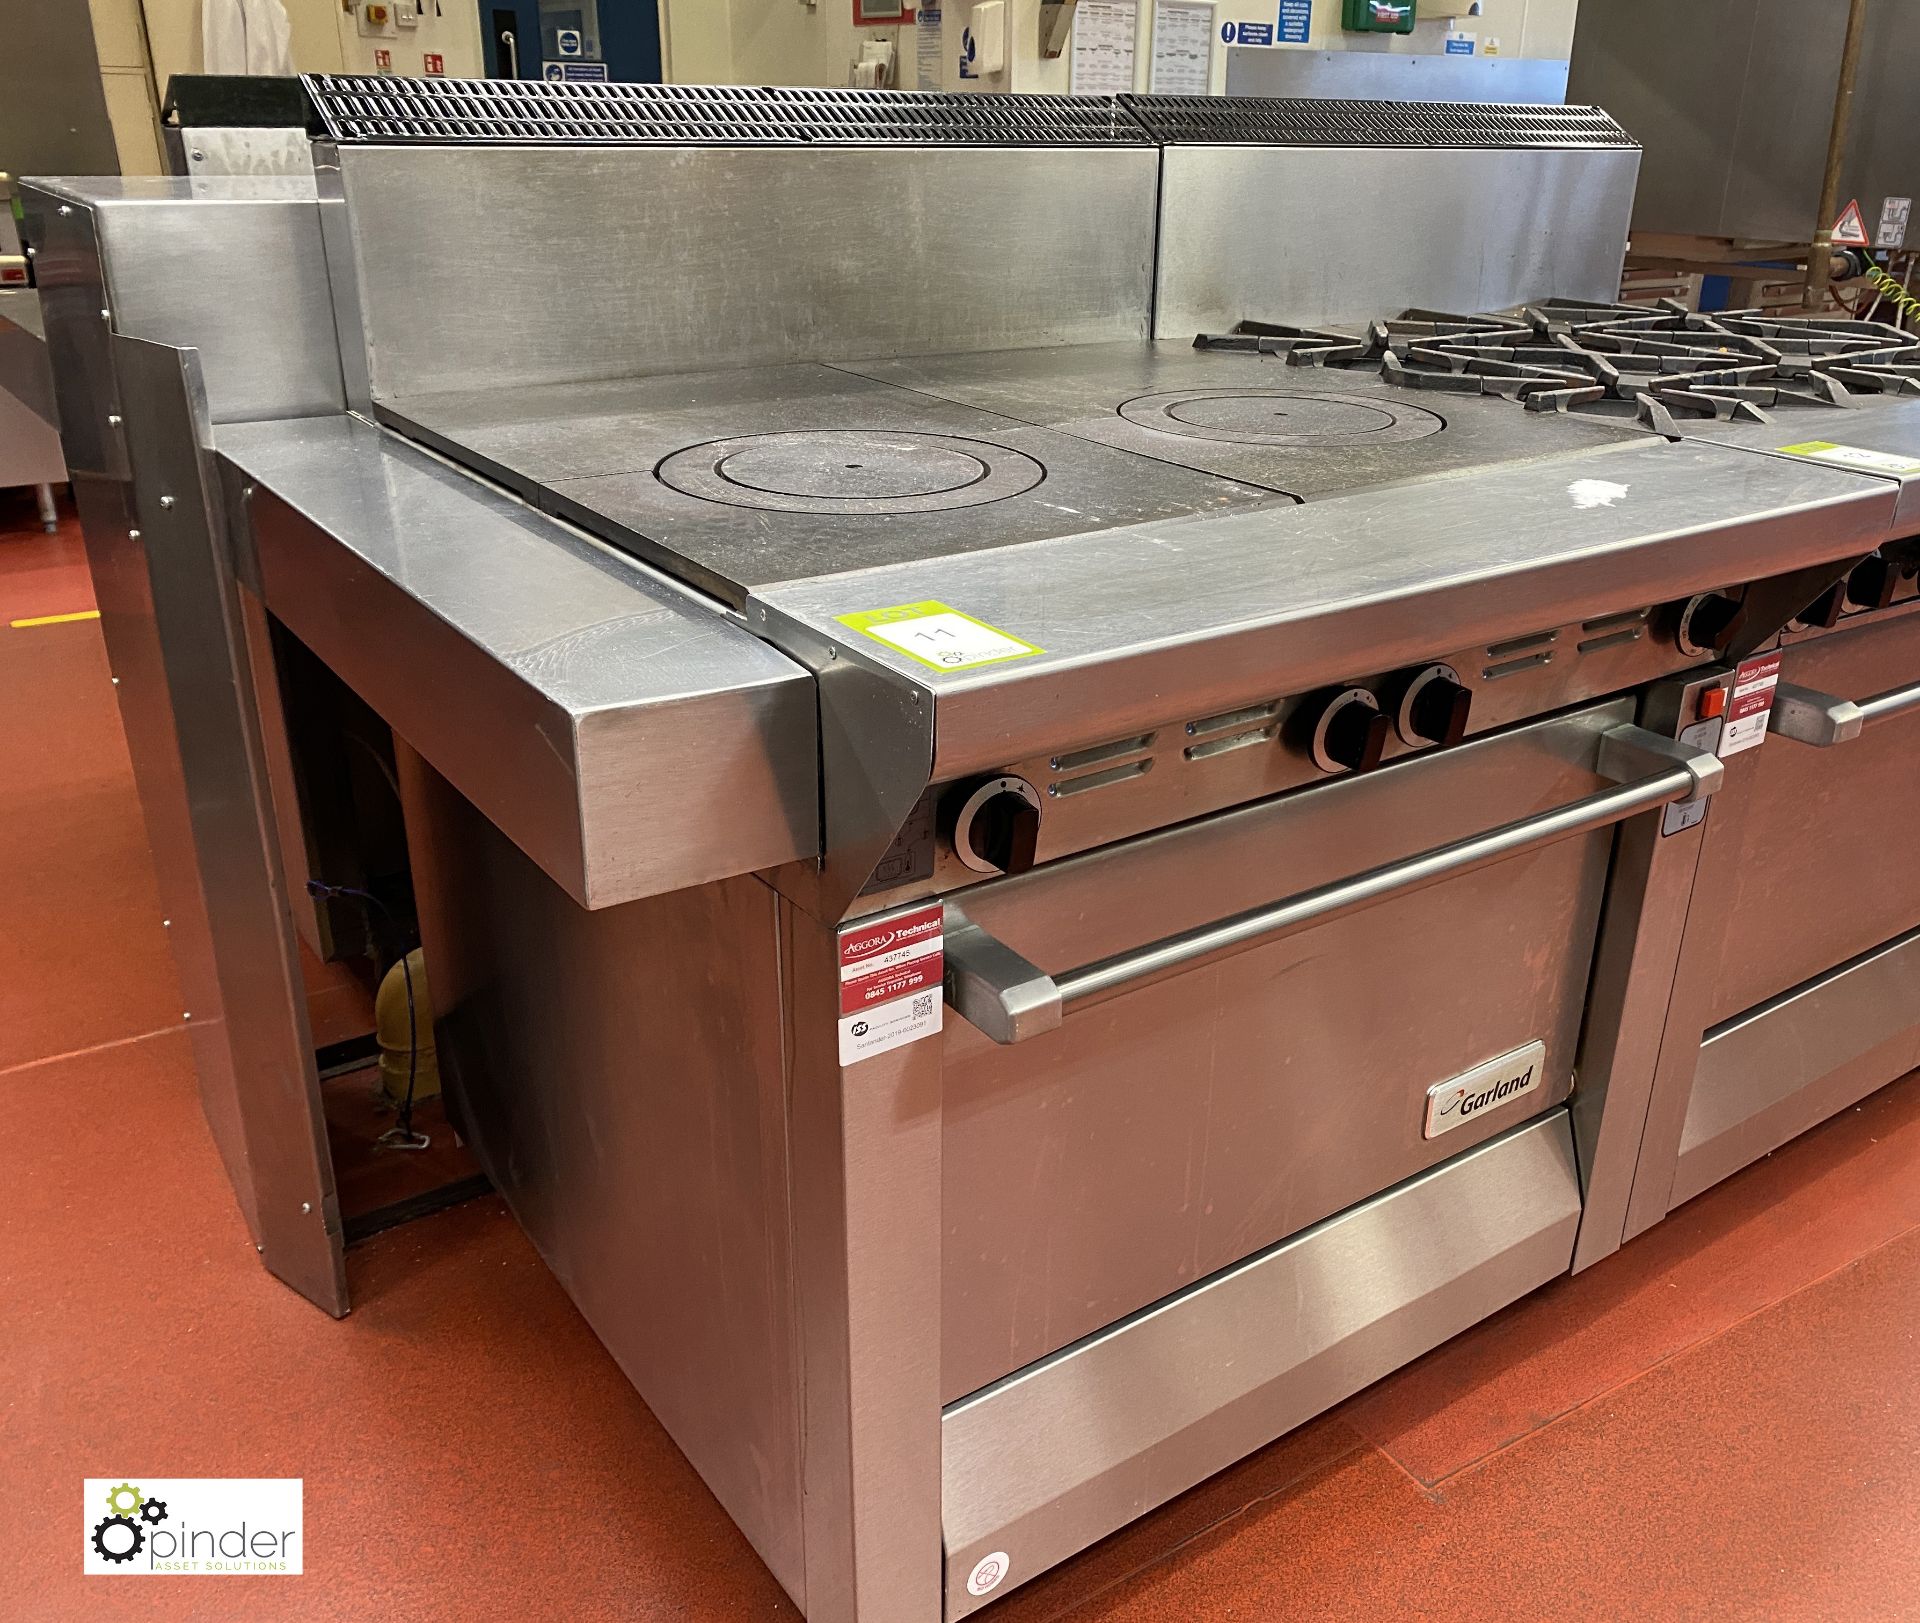 Garland stainless steel gas fired Contact Range, with 2 bullseye top and single oven, 870mm x - Image 5 of 6